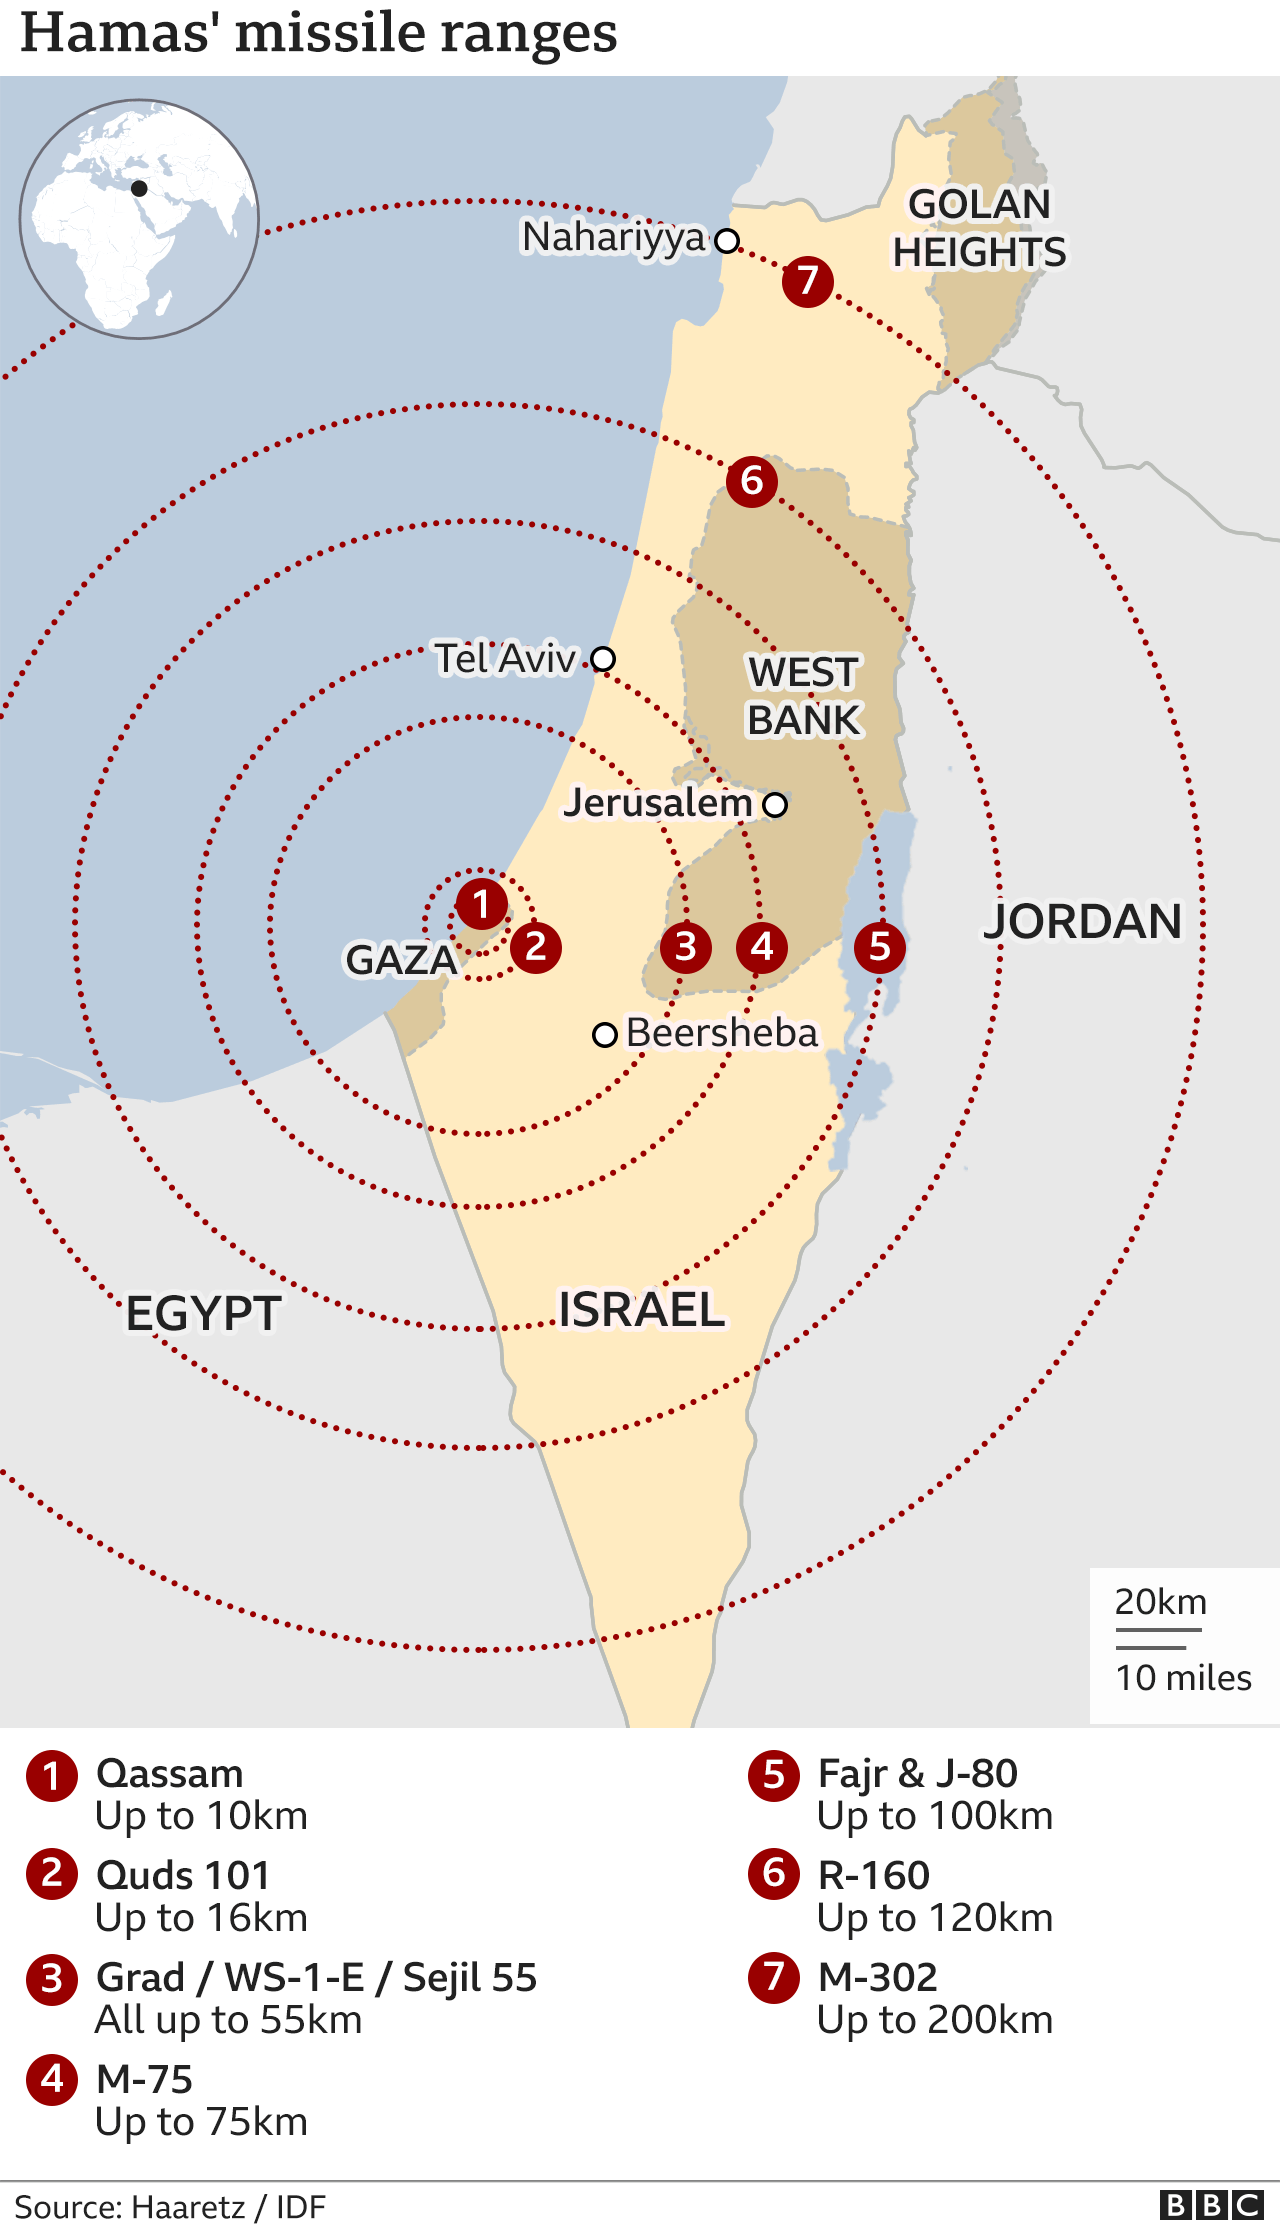 Map showing ranges of Hamas' missiles